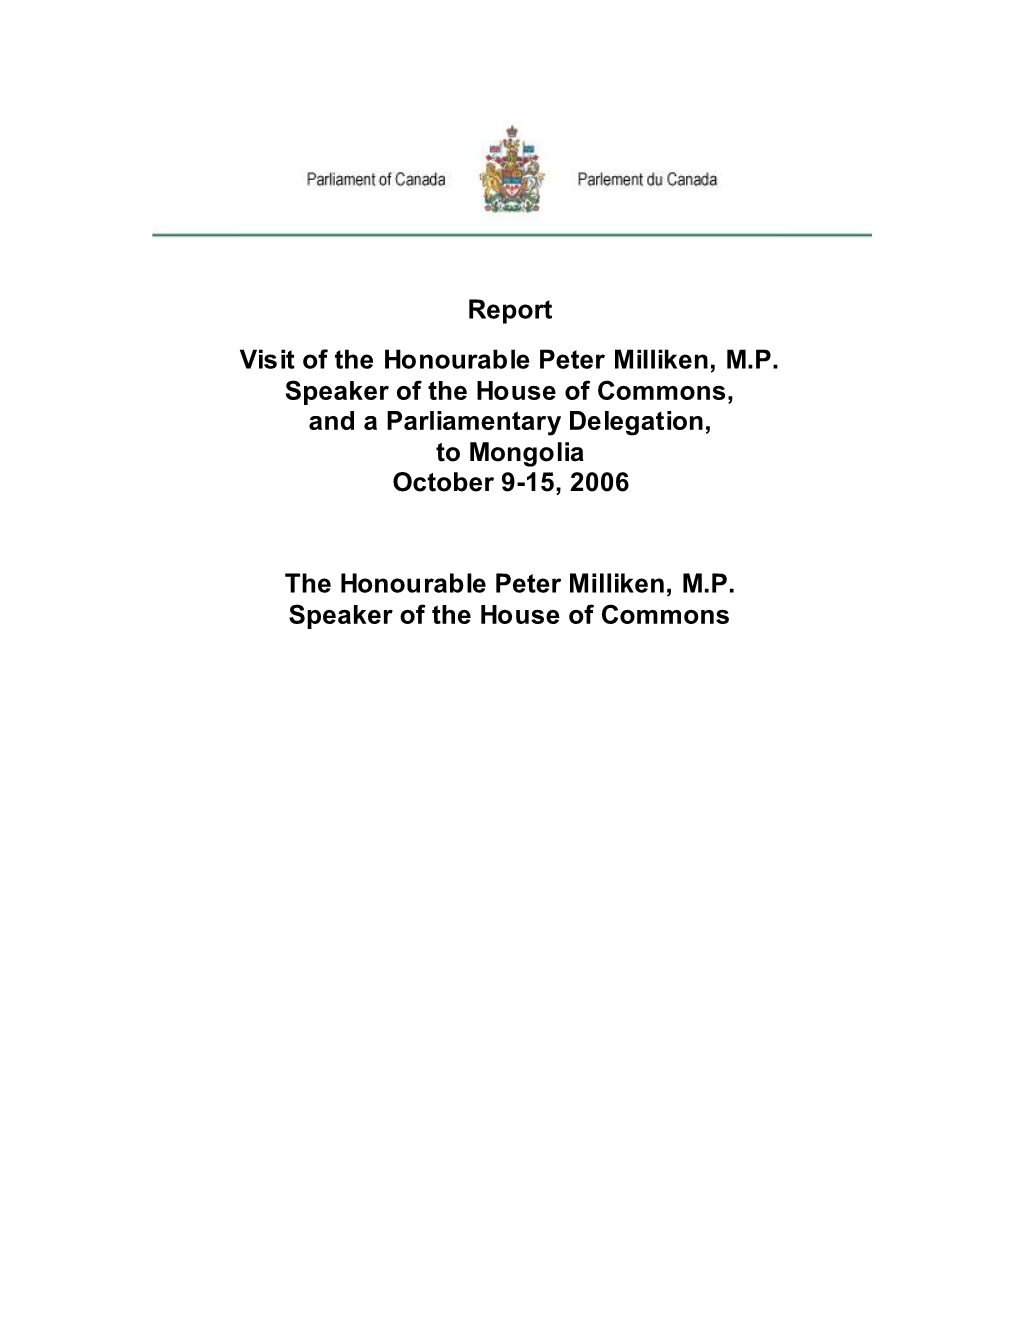 Report Visit of the Honourable Peter Milliken, M.P. Speaker of the House of Commons, and a Parliamentary Delegation, to Mongolia October 9-15, 2006